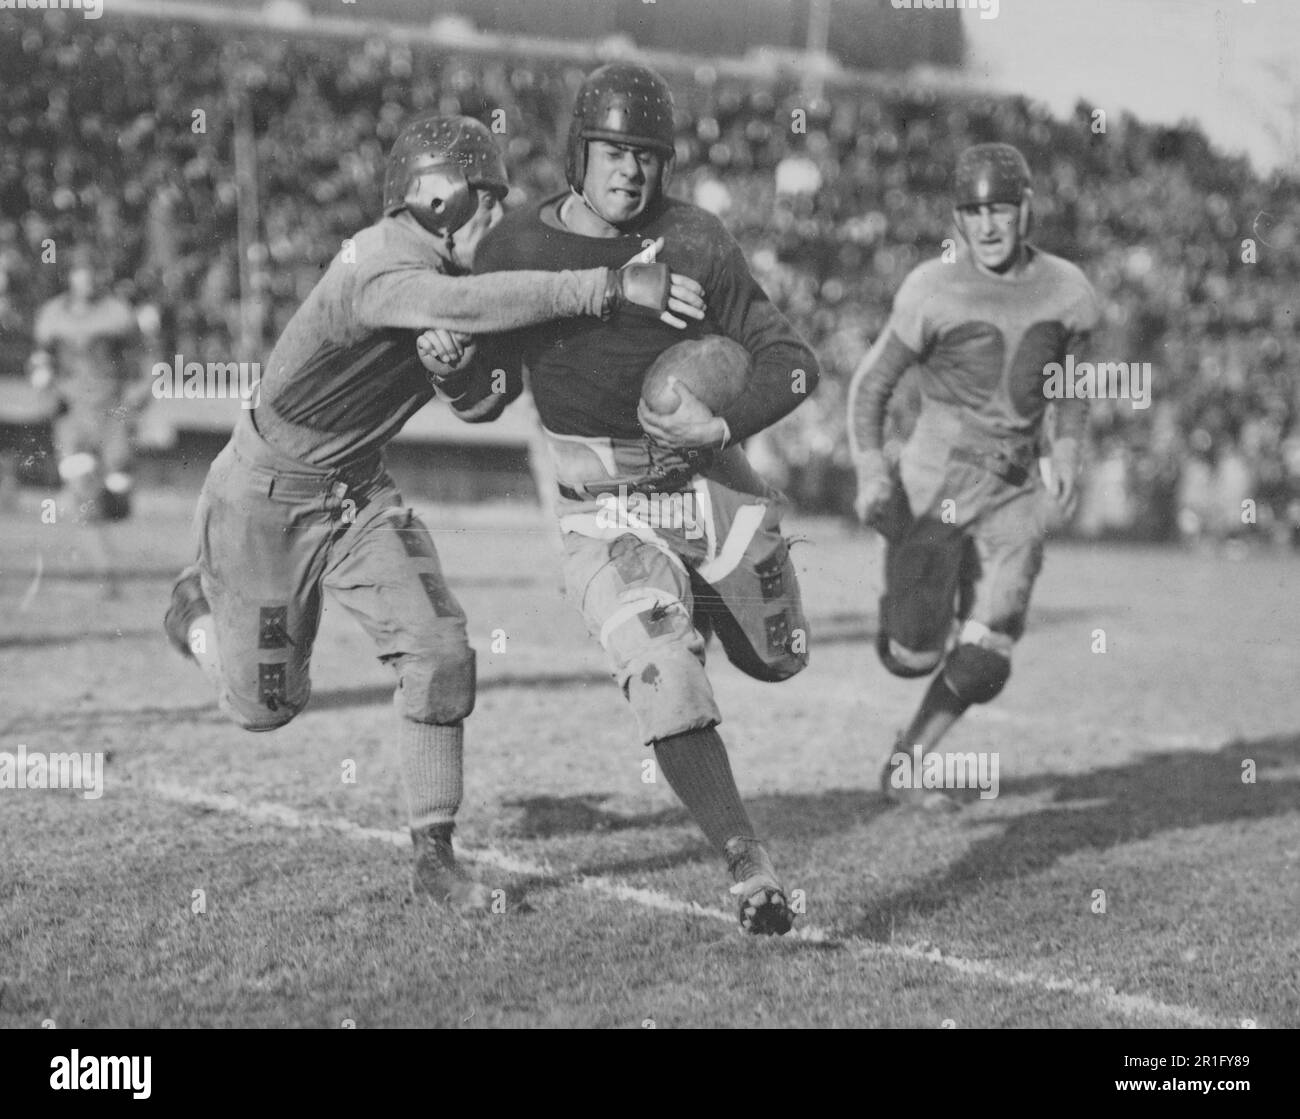 Archival Photo: Running back with the football, about to be tackled ca. 1920s Stock Photo